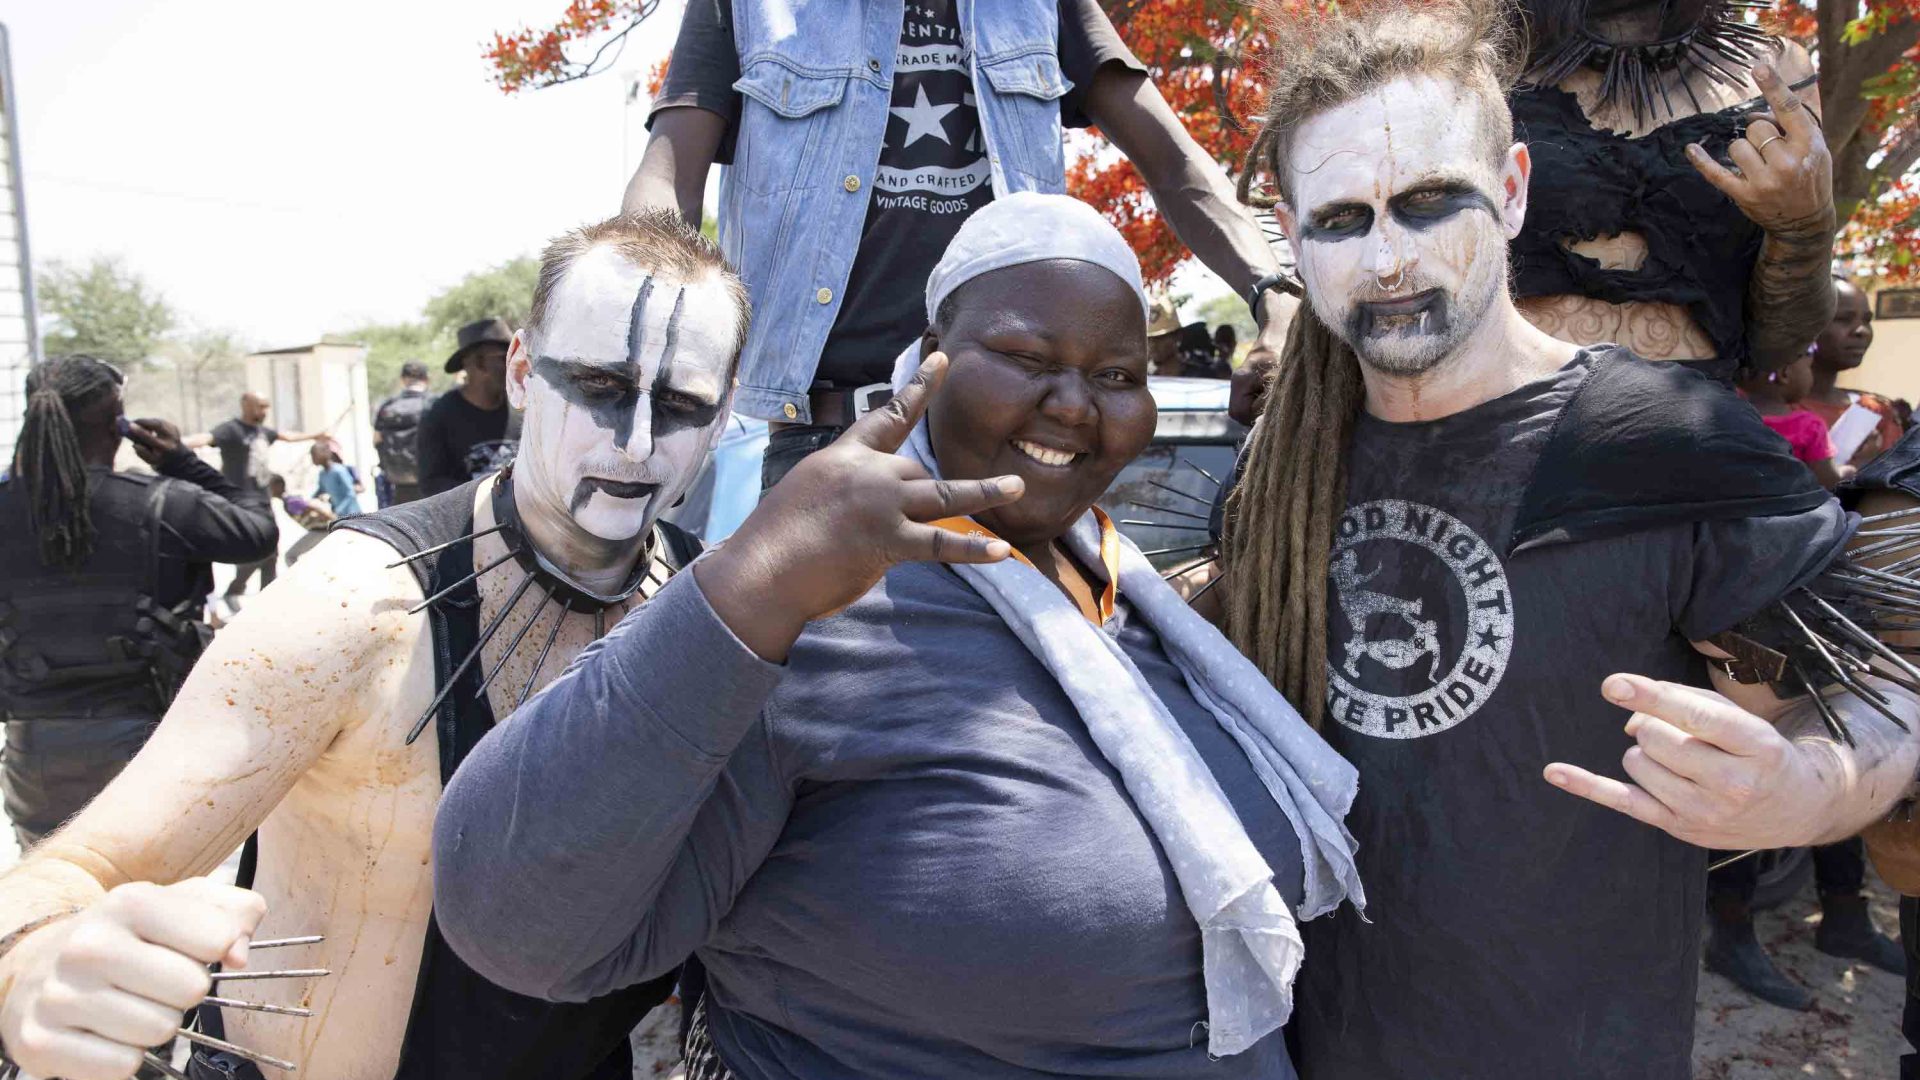 A woman poses with members of a metal band.